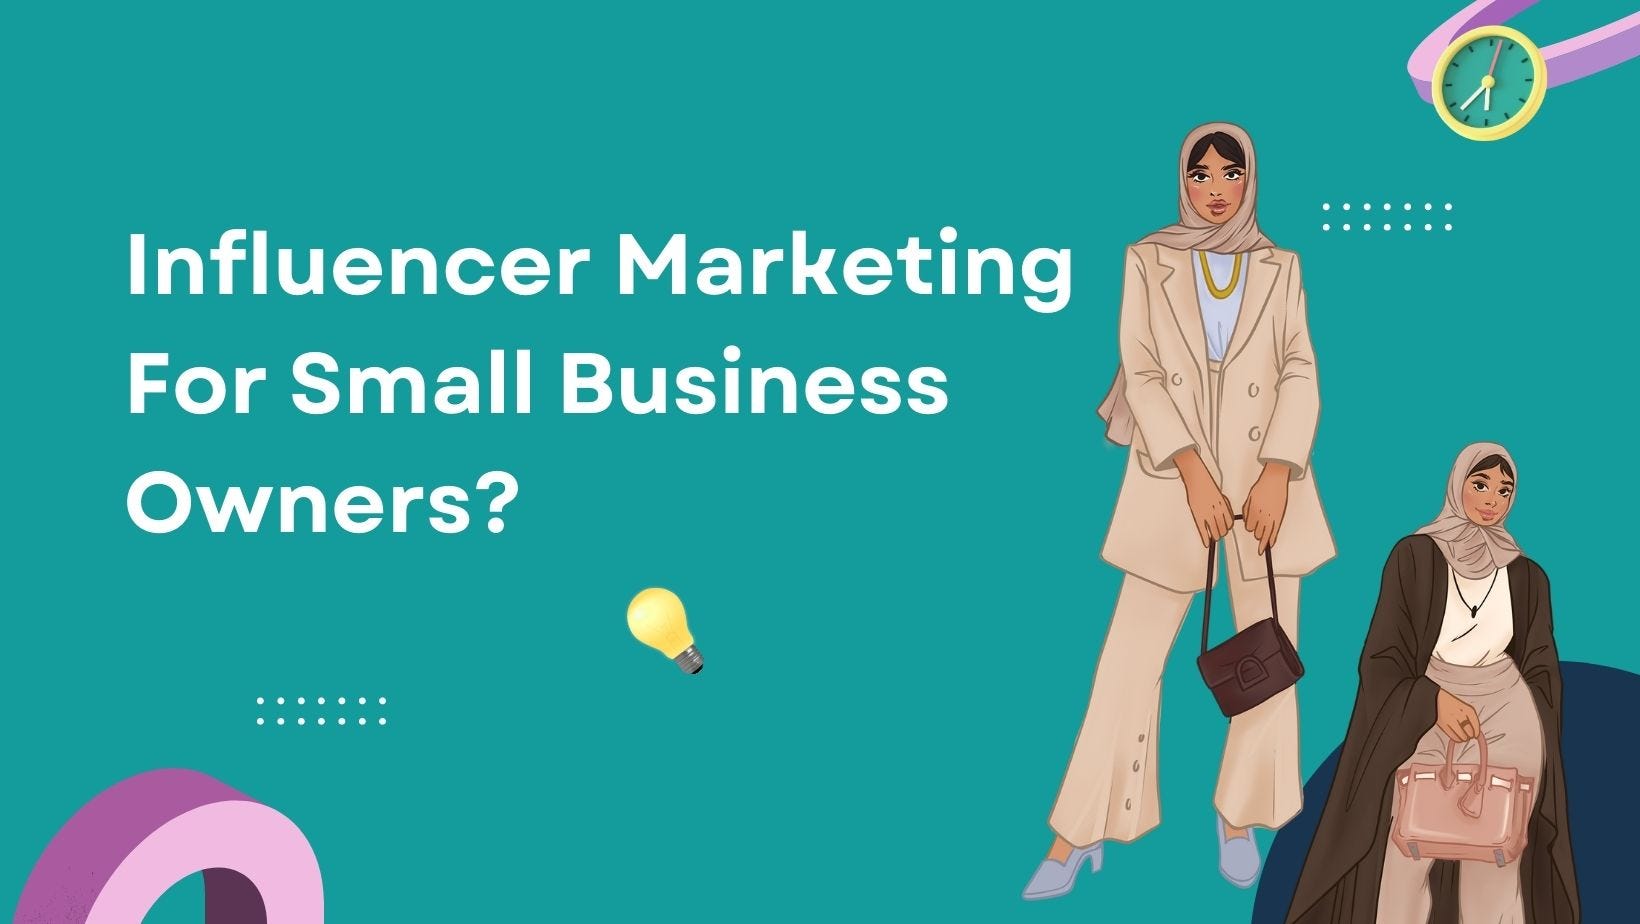 How to Use Influencer Marketing For Small Businesses